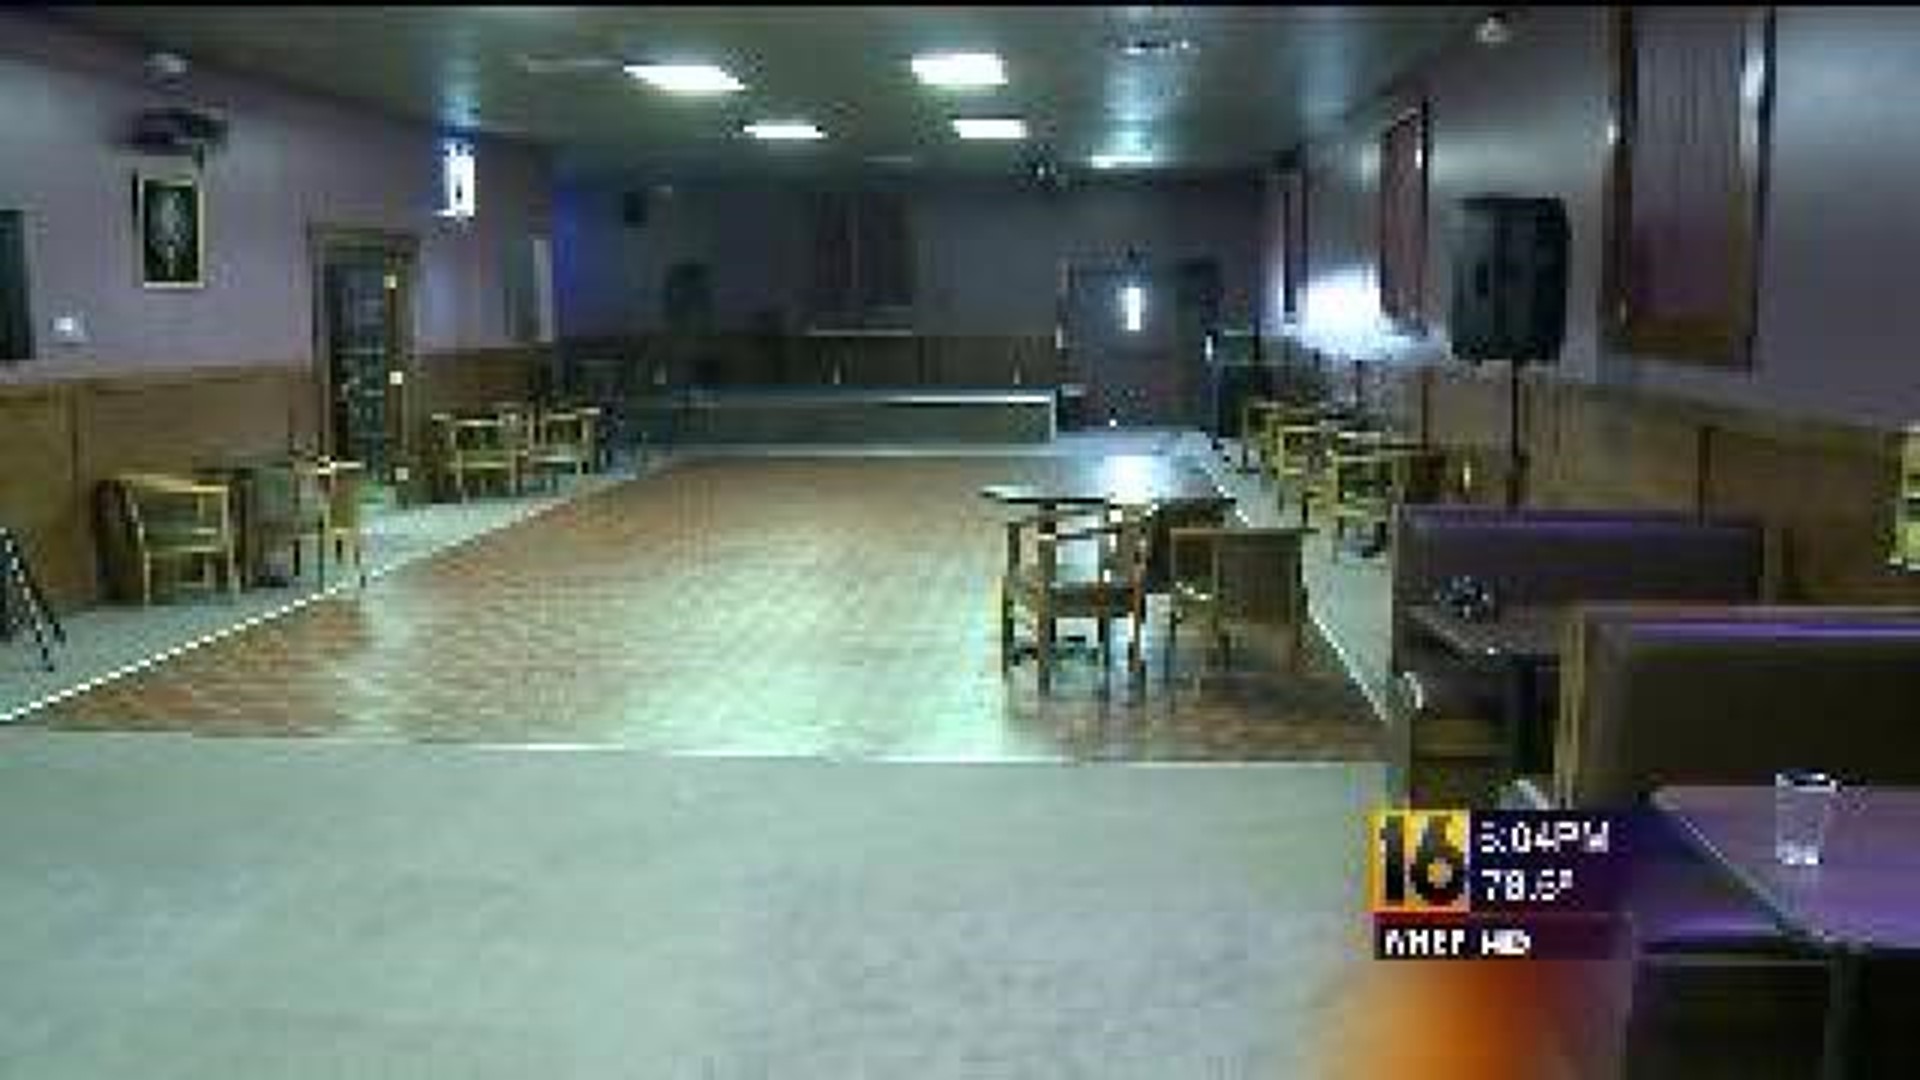 Complaints Lead To Bar Being Closed